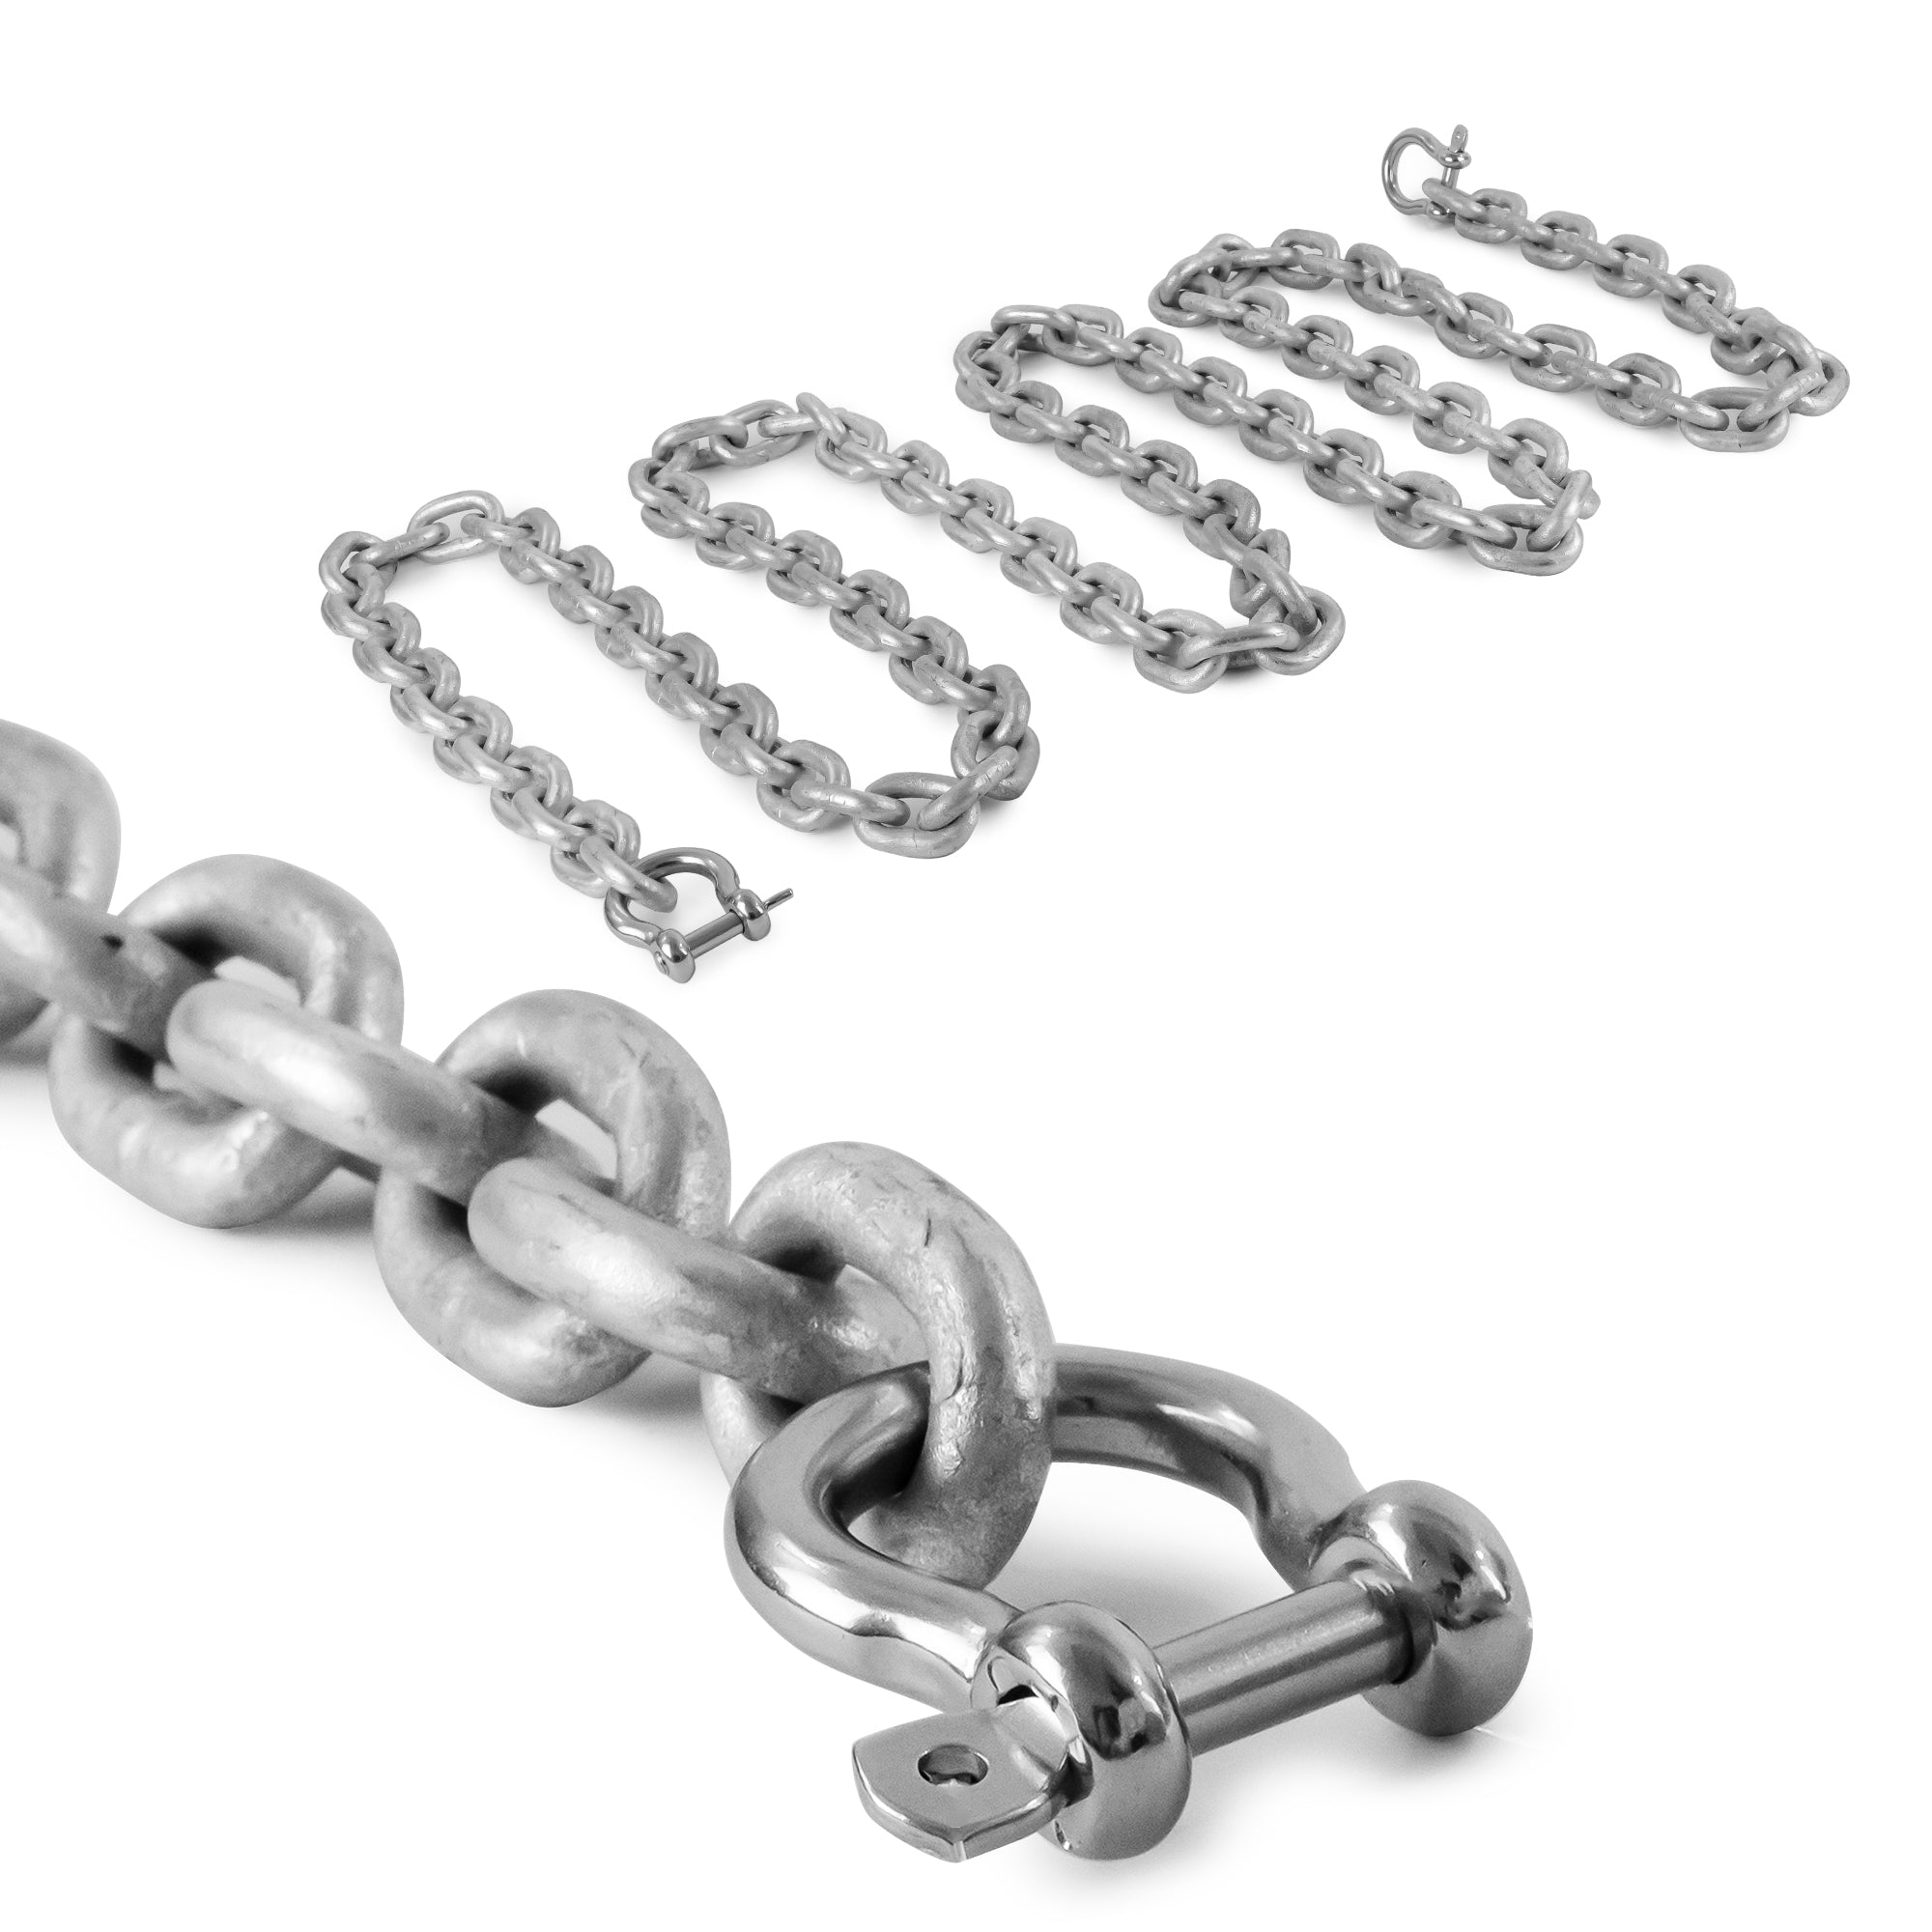 Boat Anchor Lead Chain with Shackles, 5/16" x 10', HTG4 Galvanized Steel - FO4490-G10